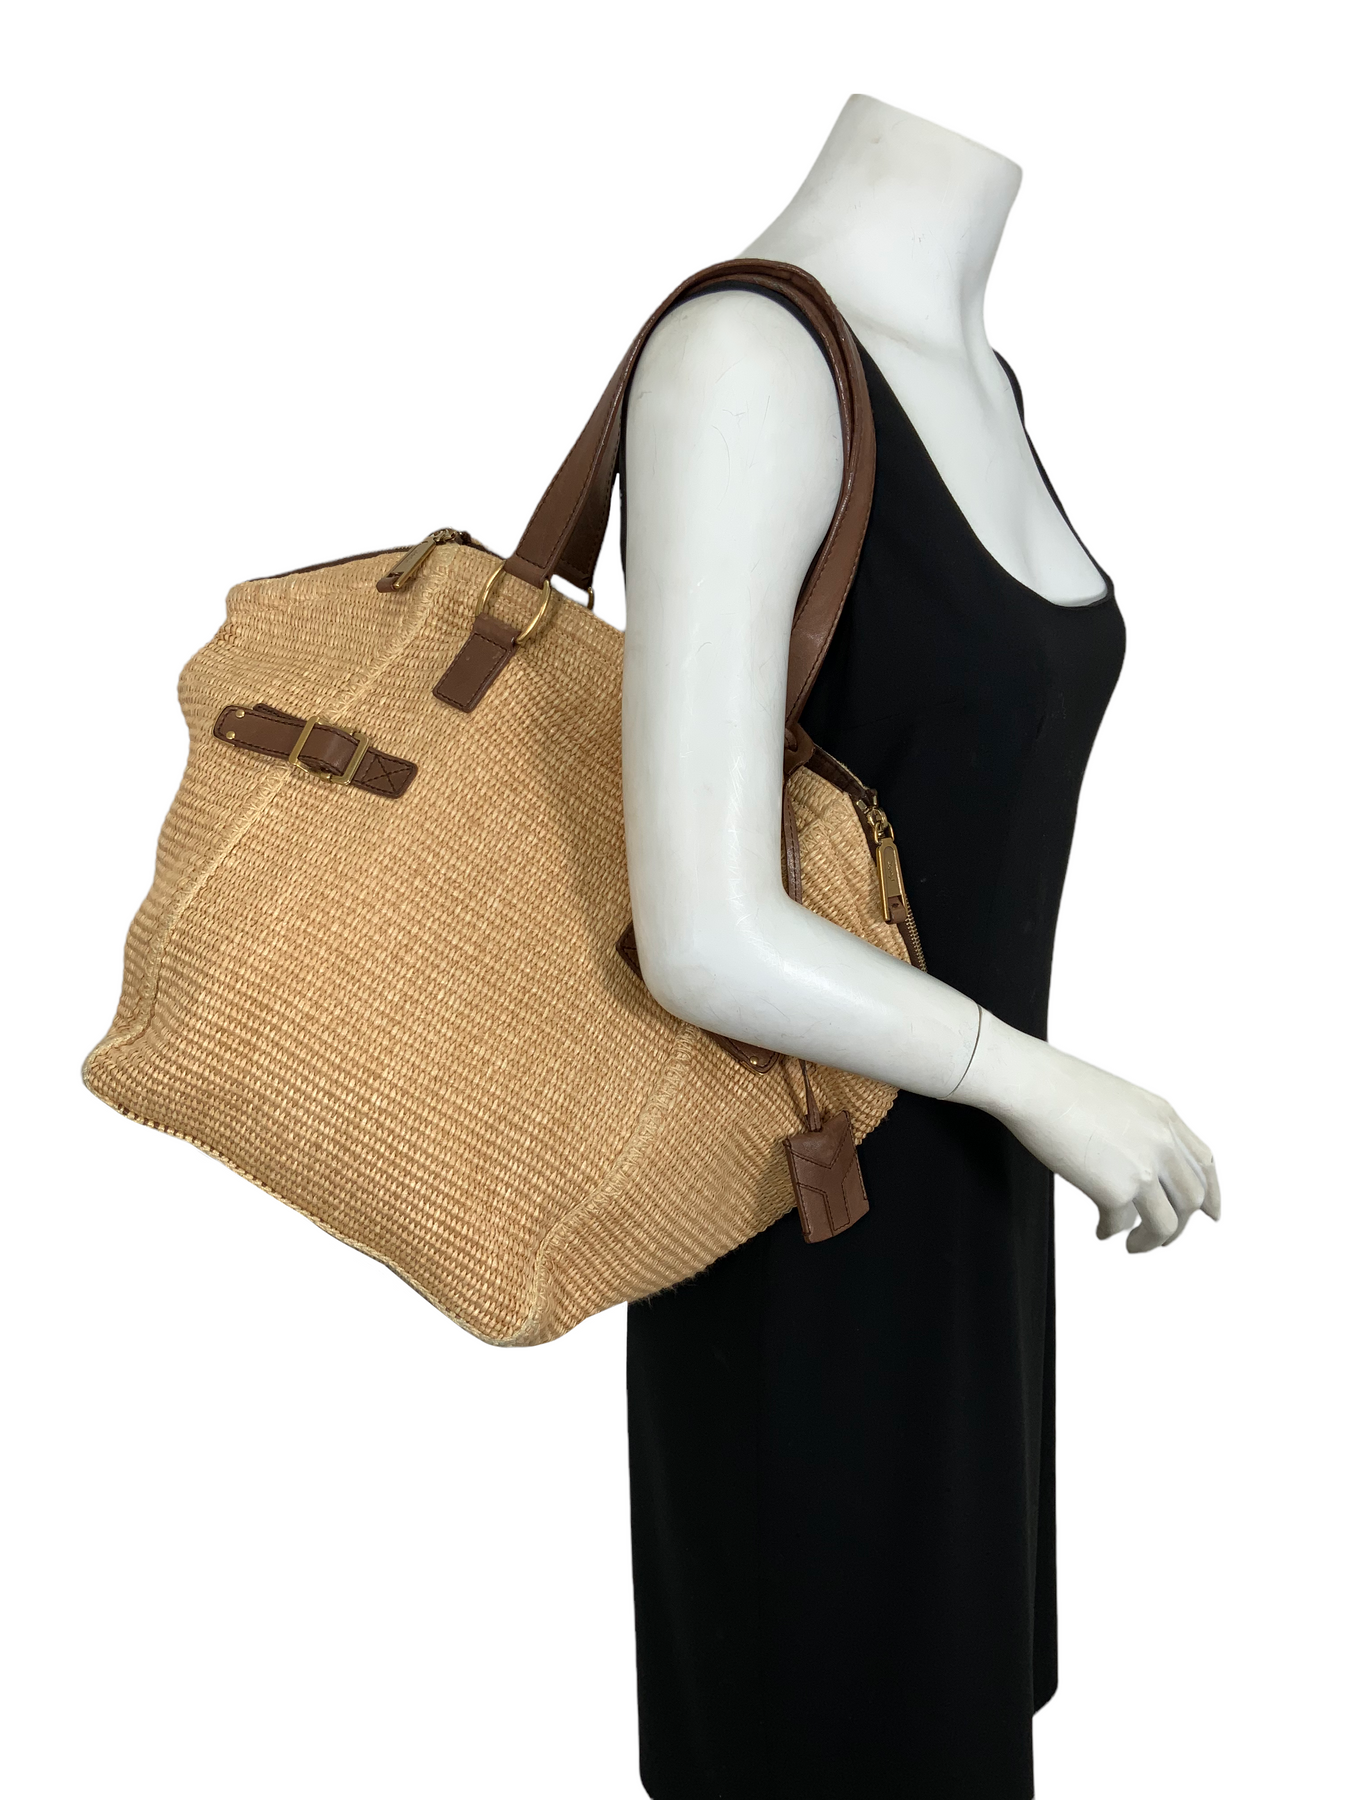 Yves Saint Laurent Raffia Downtown Straw Tote Bag - Consigned Designs